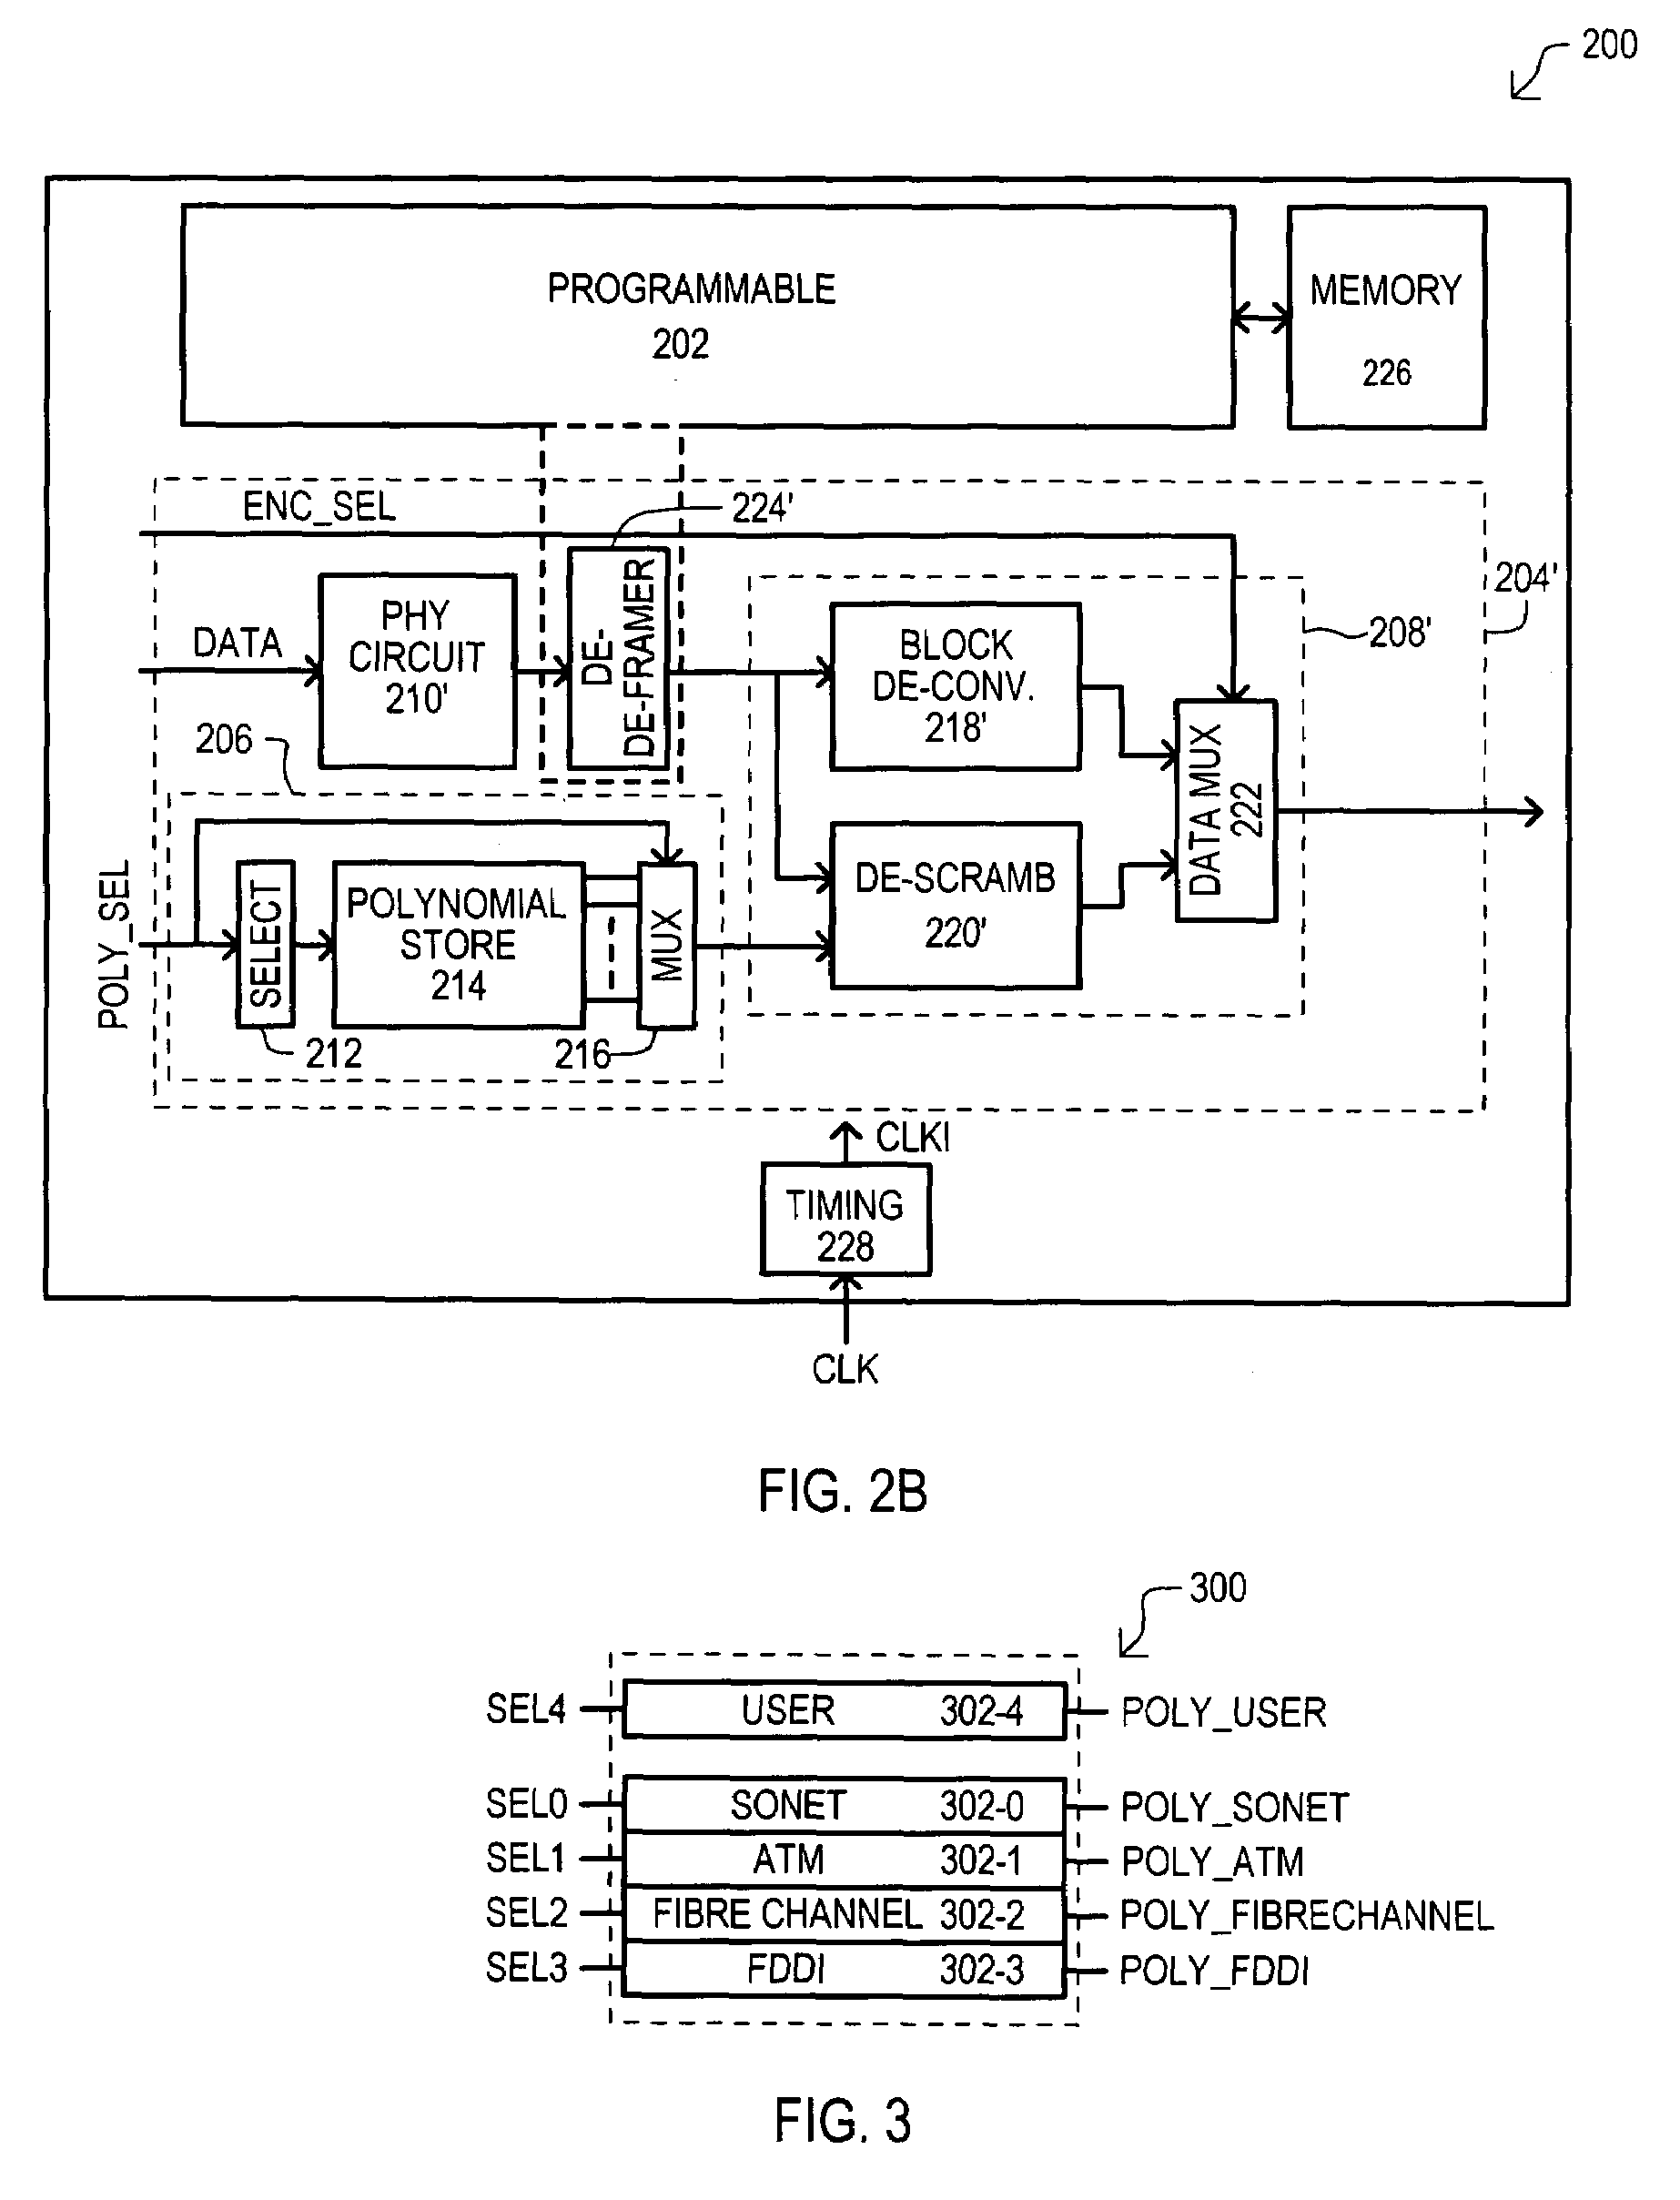 Architecture for efficient implementation of serial data communication functions on a programmable logic device (PLD)